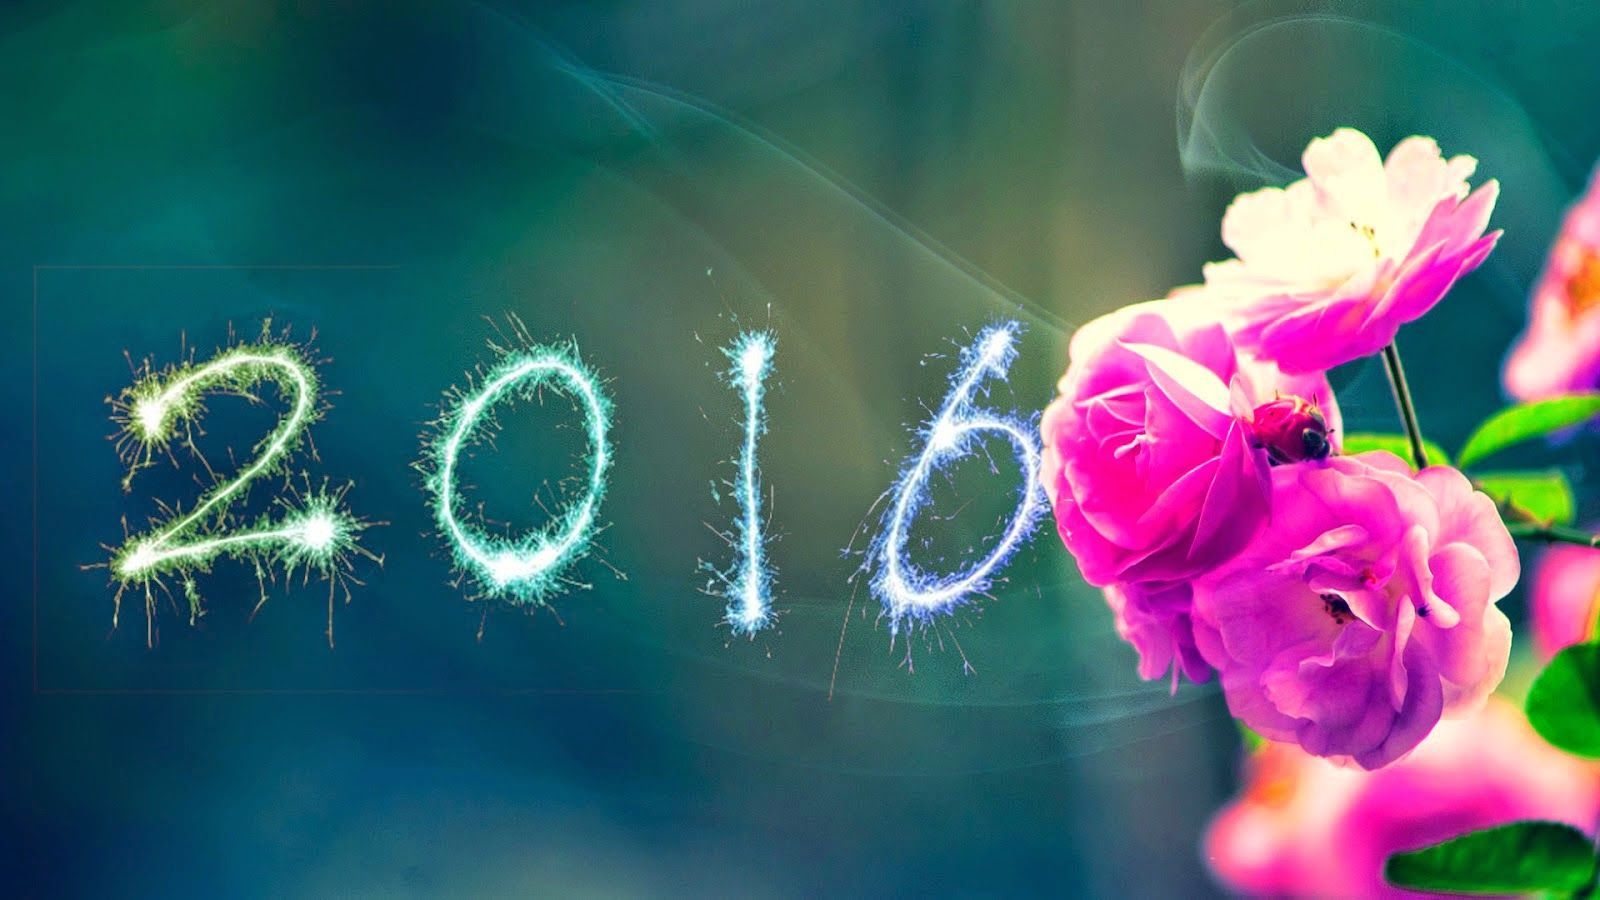 Happy New Year HD Wallpaper and Photos free Download